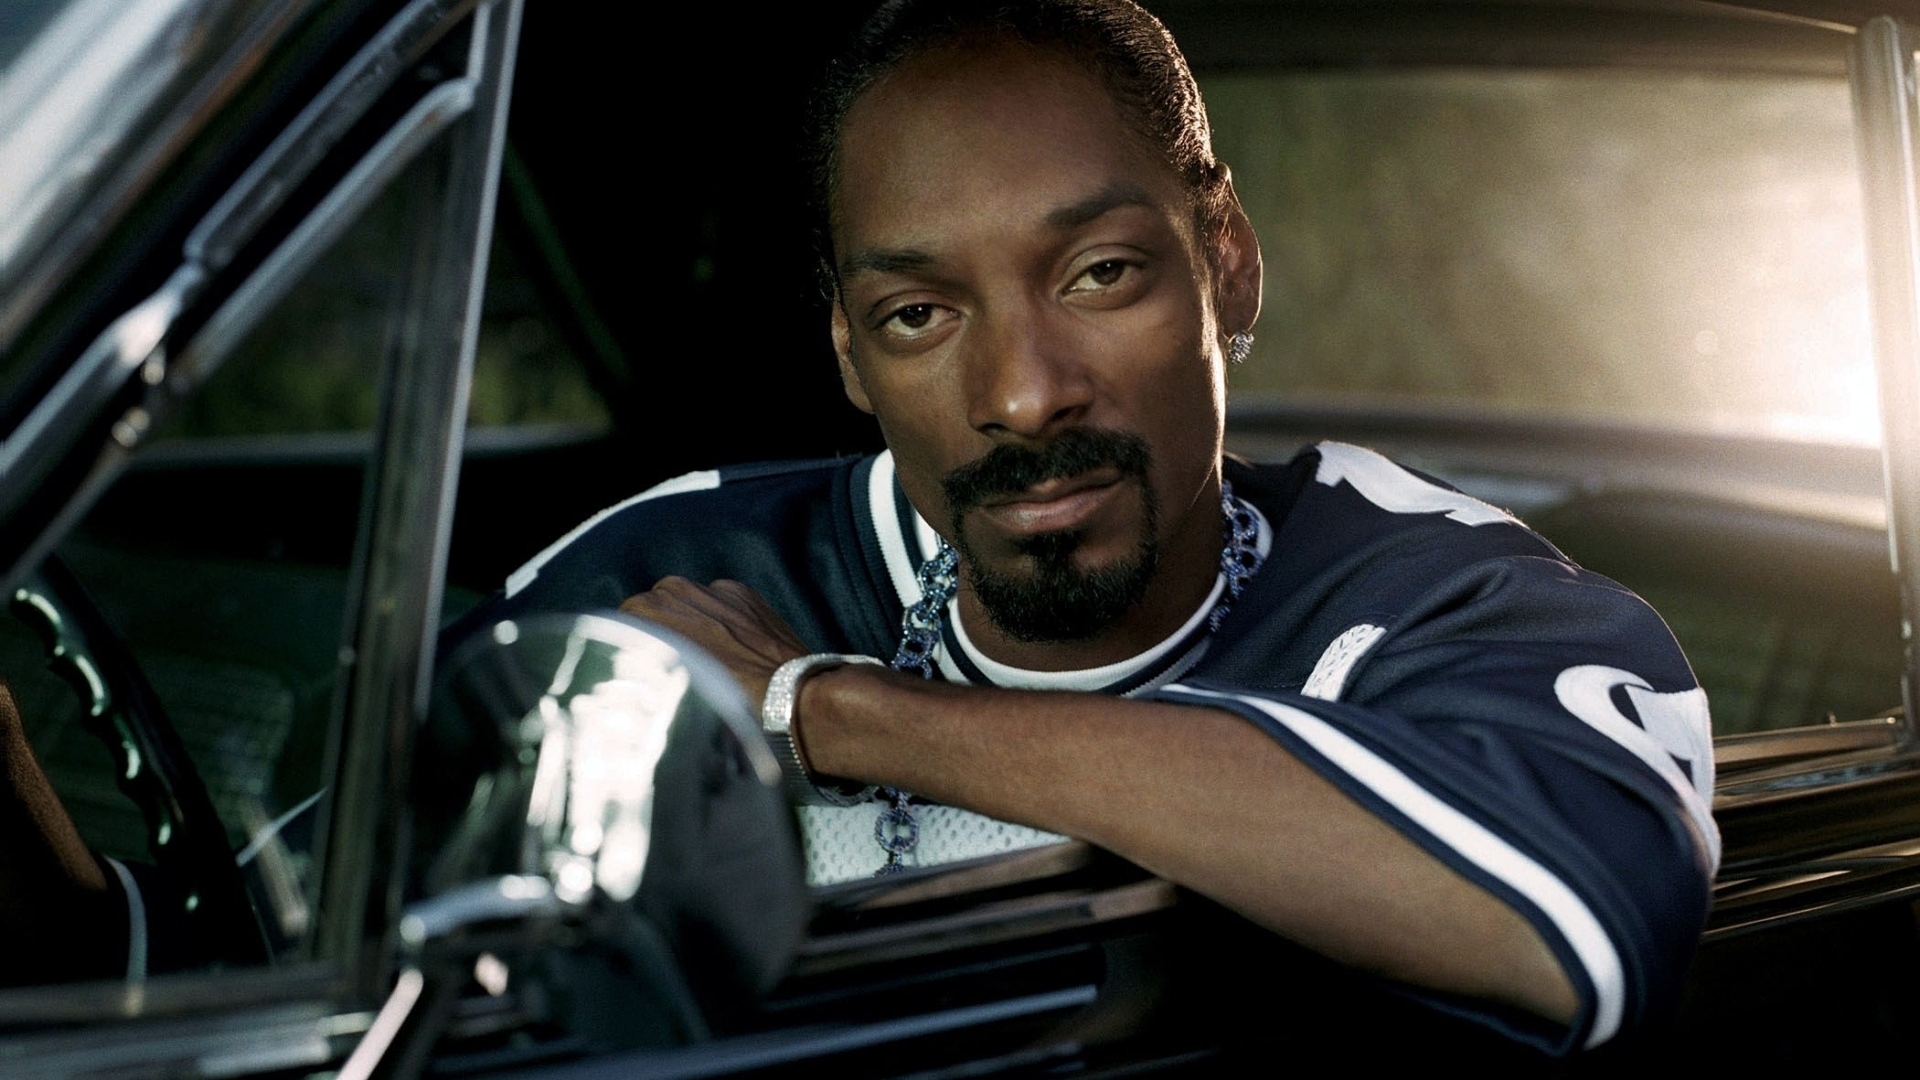 Snoop Dogg Look for 1920 x 1080 HDTV 1080p resolution